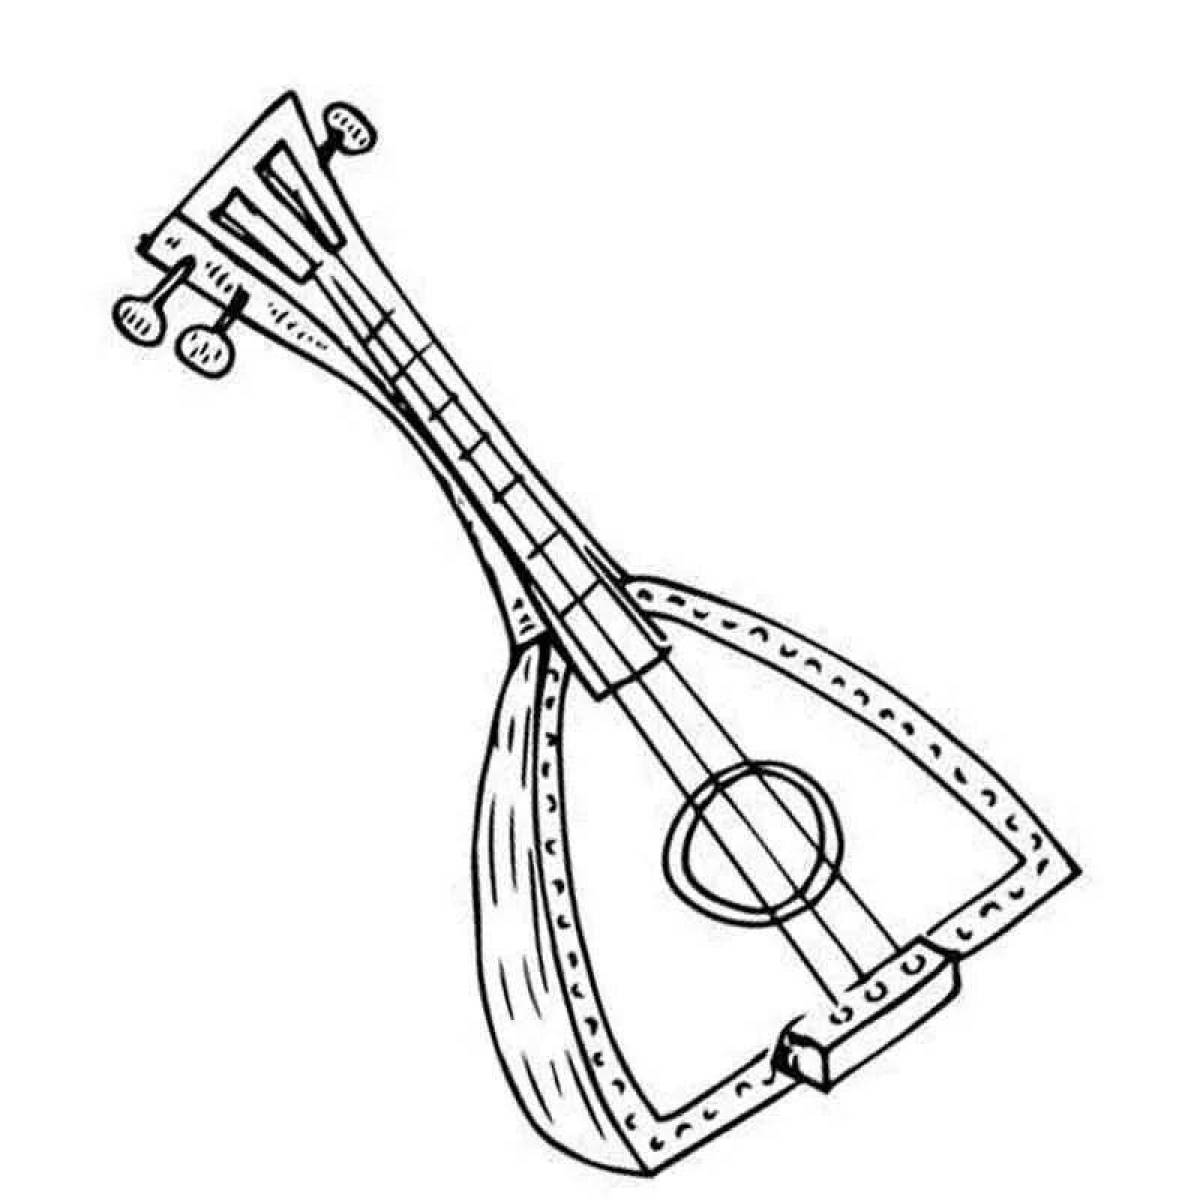 Tempting coloring of folk instruments